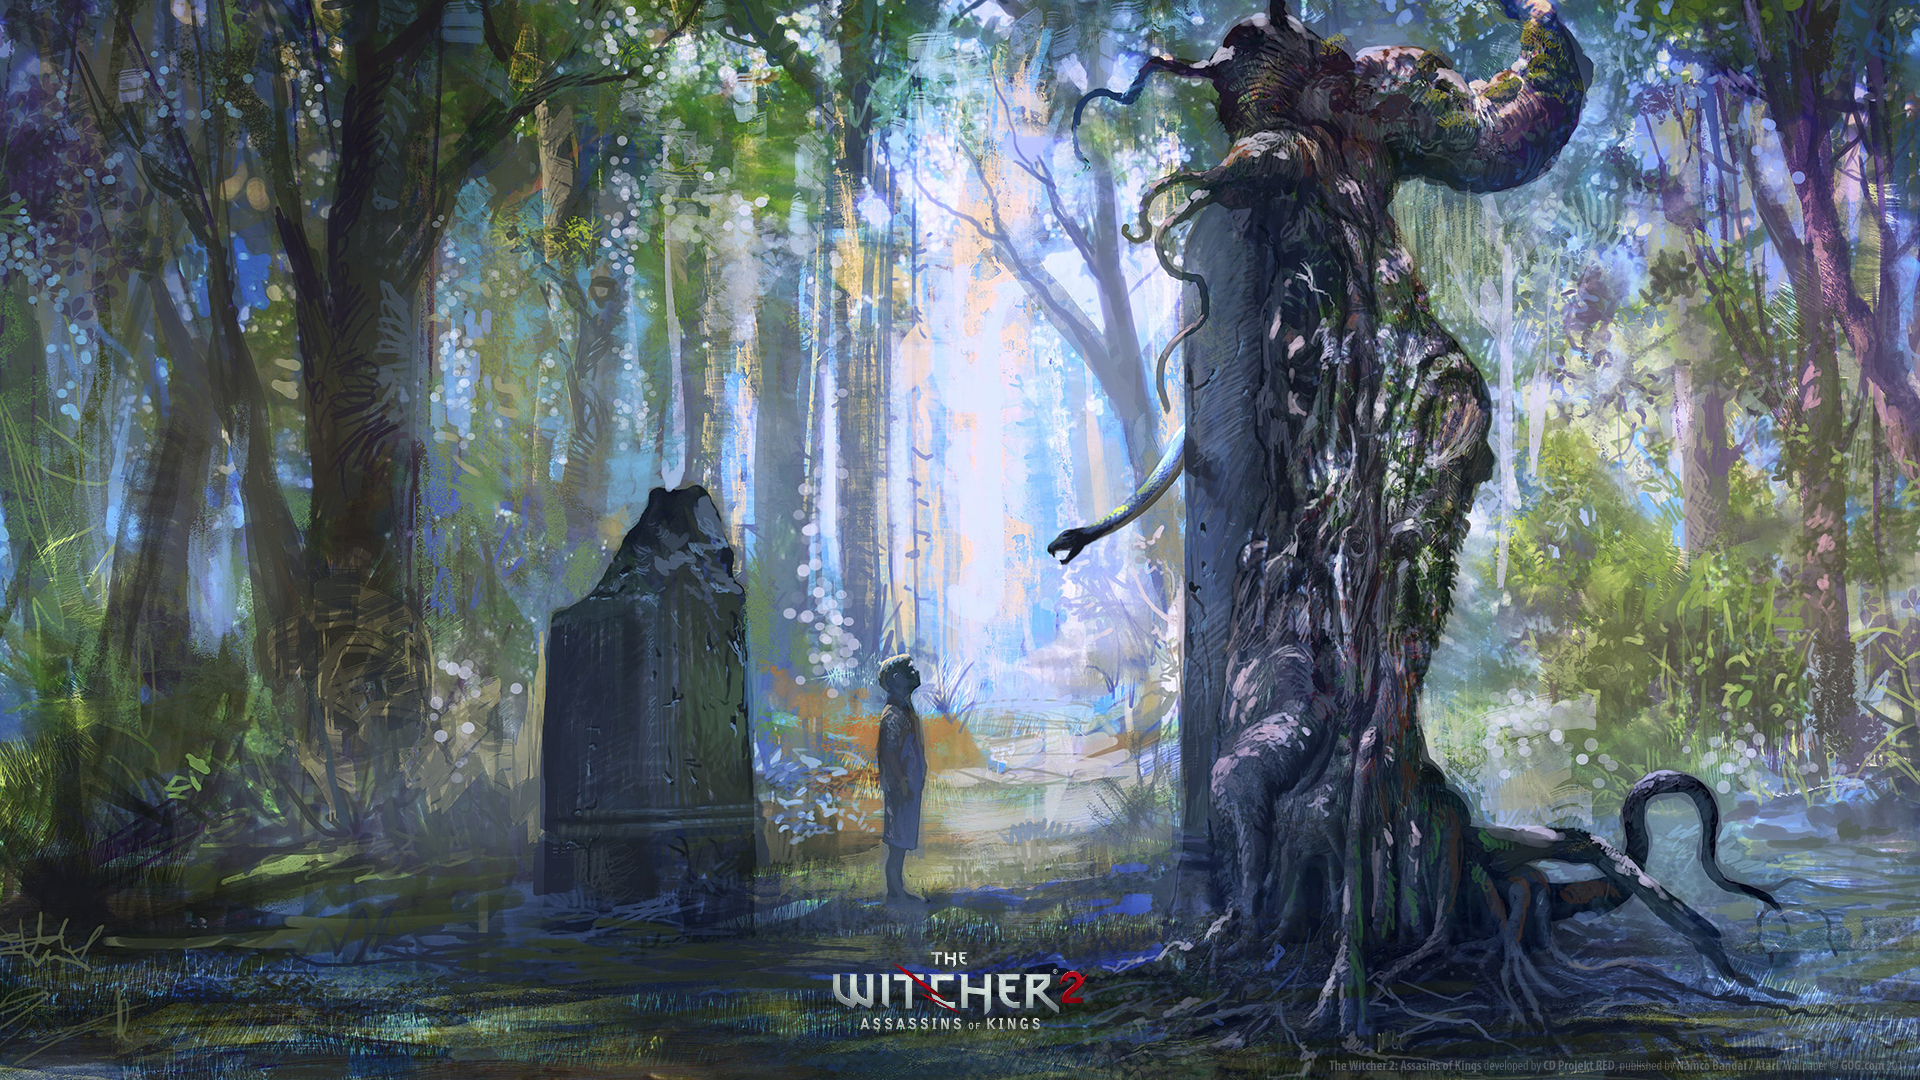 the, Witcher, Drawing, Forest Wallpaper